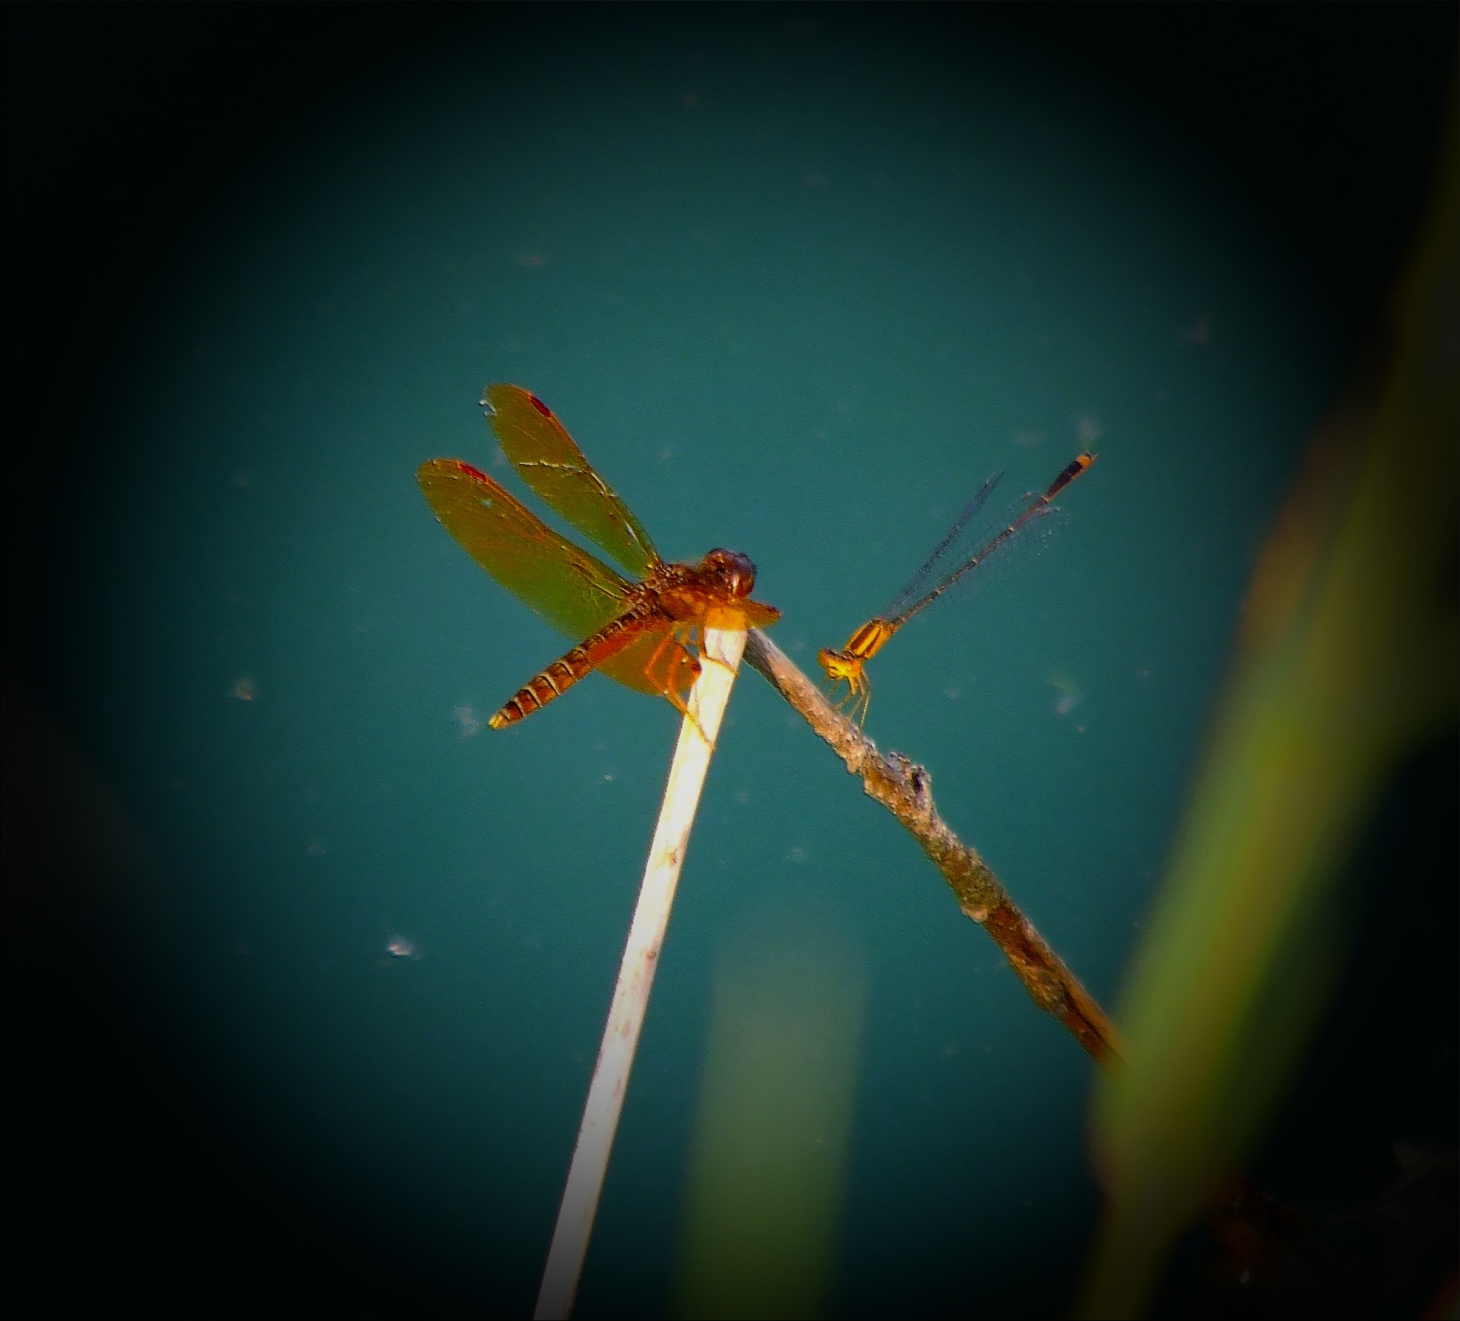  Dragonfly and Damselfly. Photo by Thomas Peace c. 2015